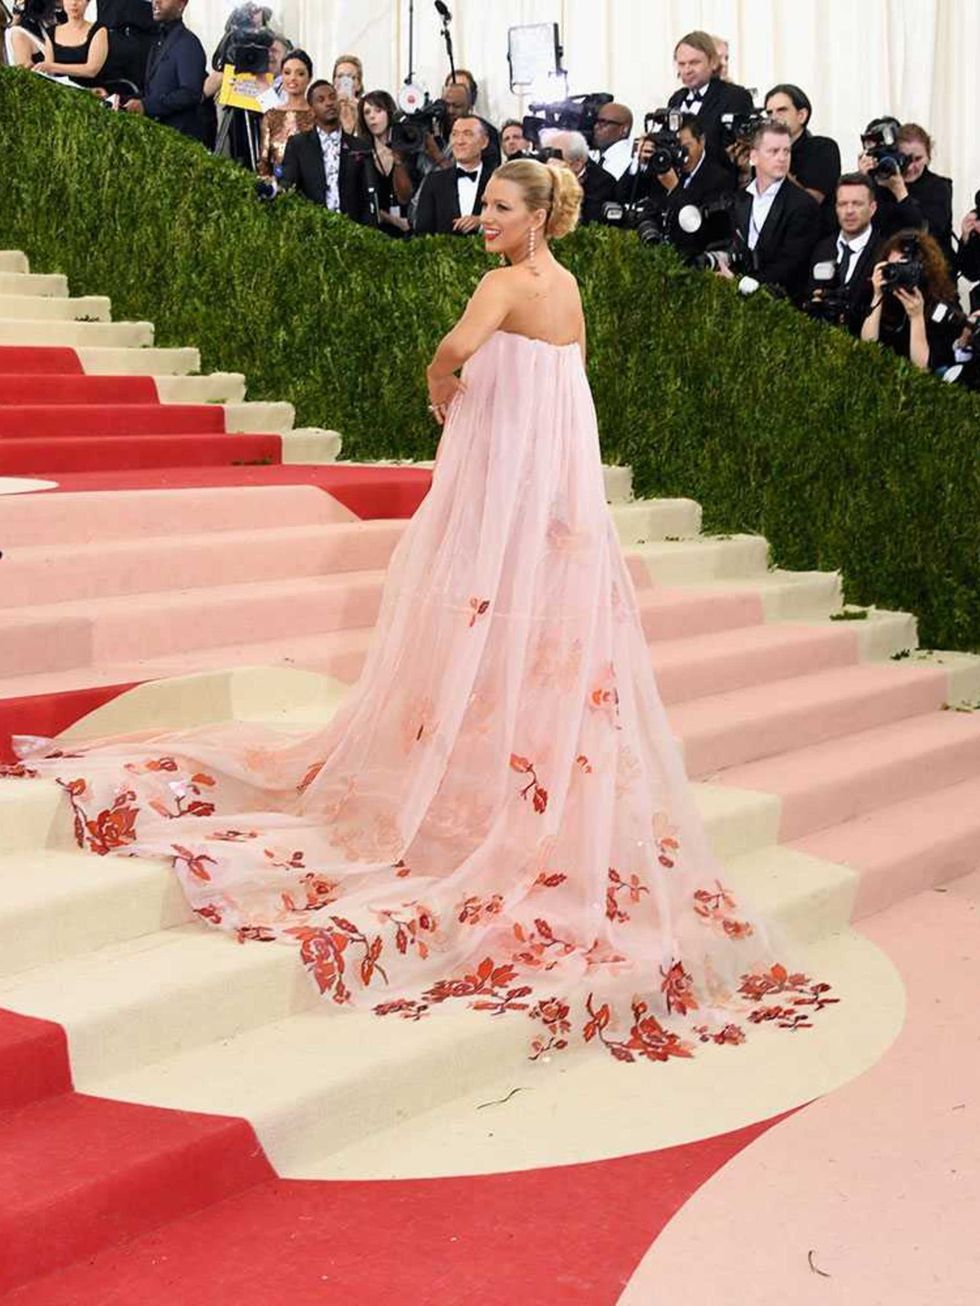 <p>In a sea of (sometimes ill advised) sci fi influenced costumes, Blake Lively's gown was an all out ode to romance and roses courtesy of Burberry. </p>

<p>Simply Beautiful.</p>

<p> </p>